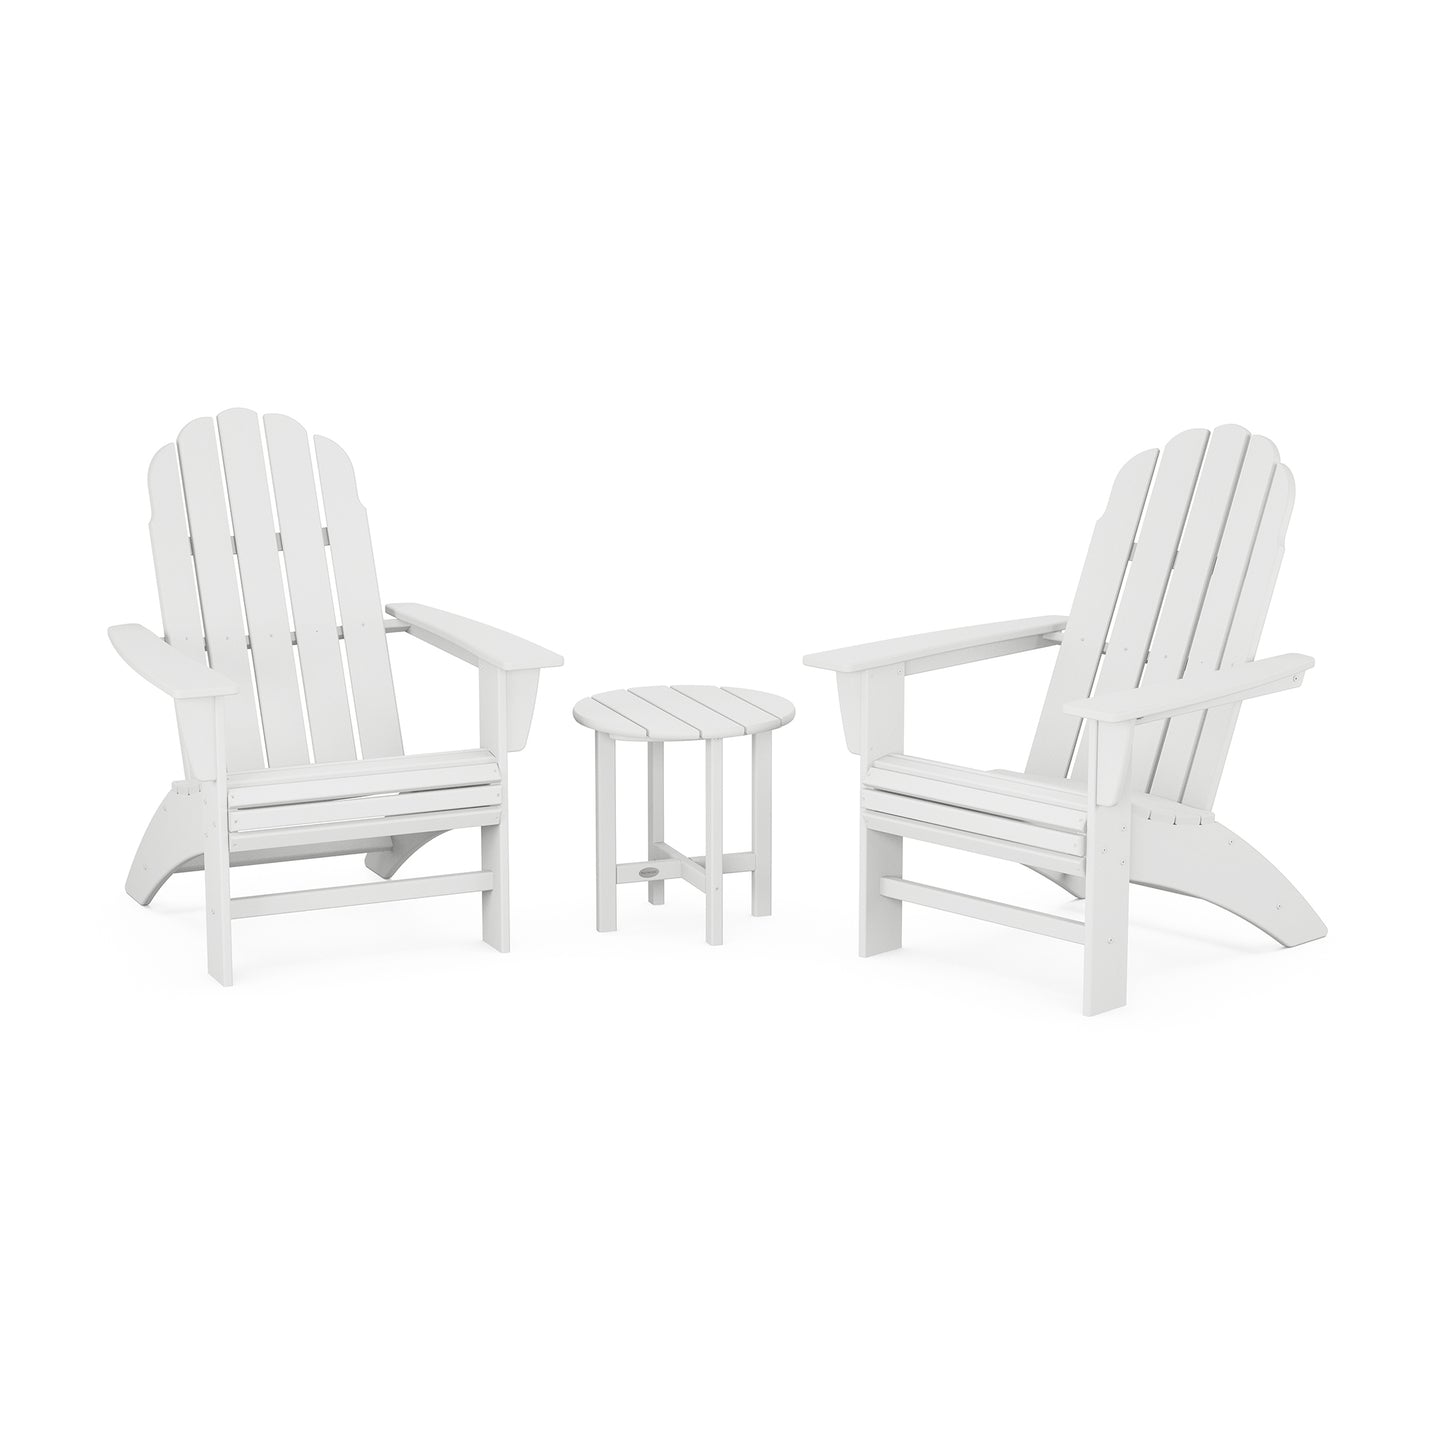 Two white weather-resistant POLYWOOD Vineyard 3-Piece Curveback Adirondack sets facing each other with a small round table between them, set against a plain white background.